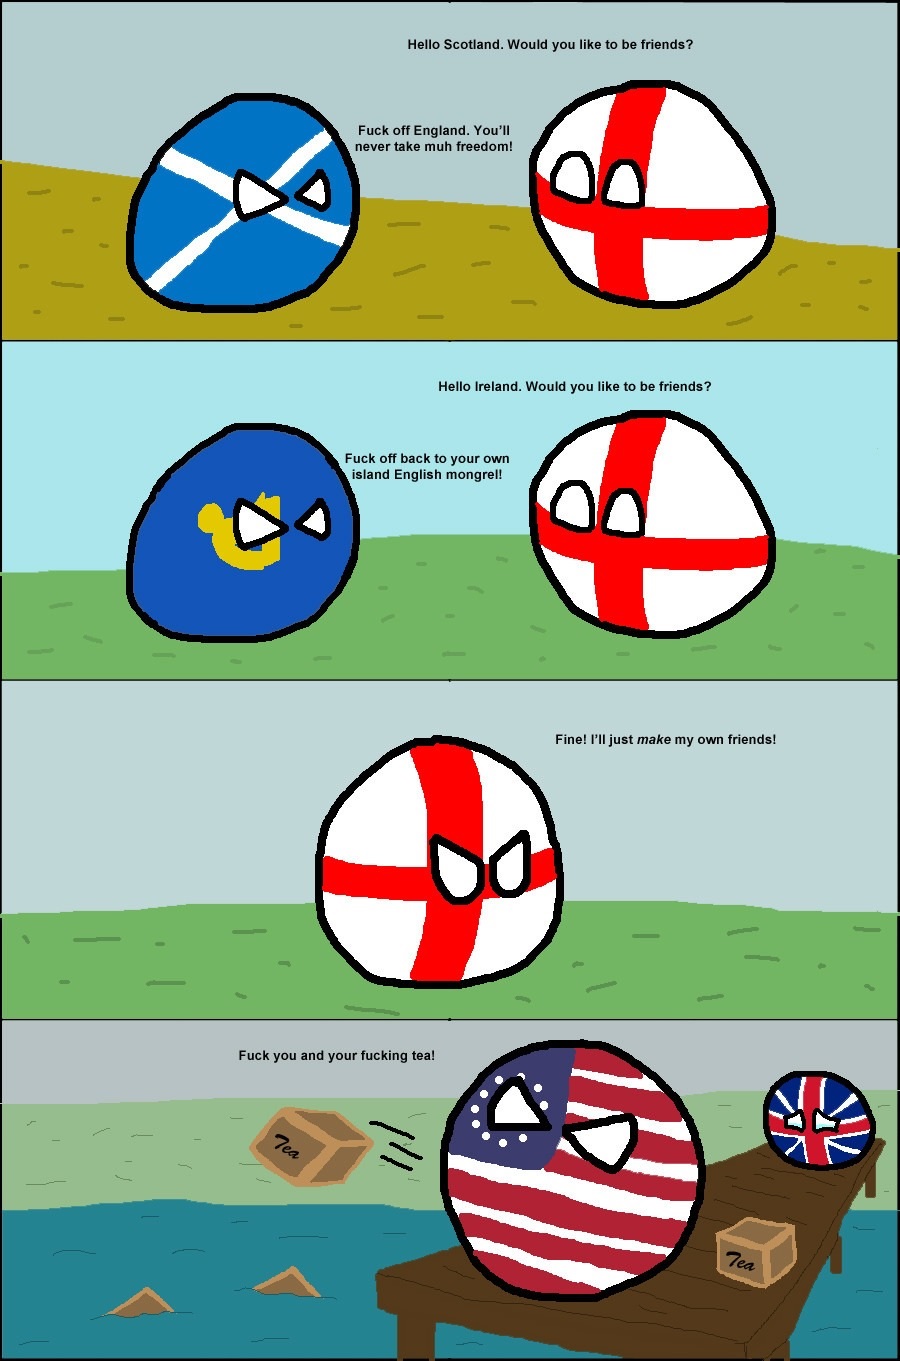 England can't into friends.